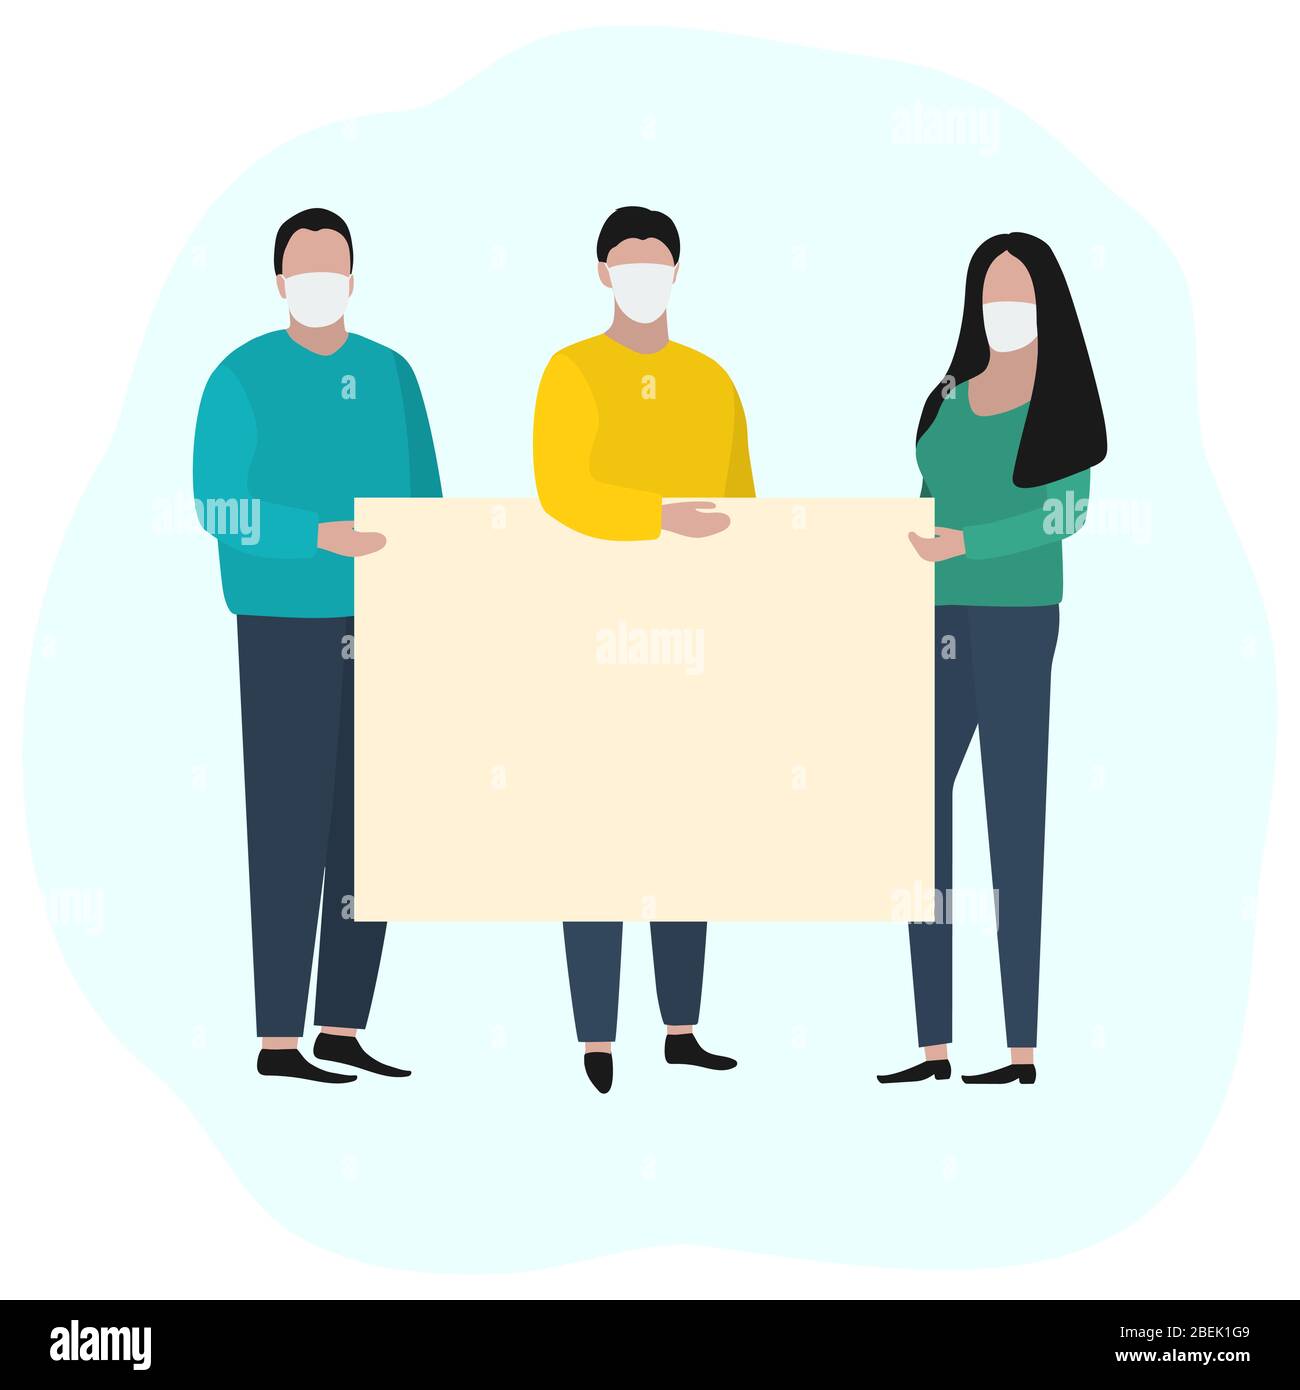 Man and a woman with a large advertising banner in medical masks. Fashion trendy illustration, flat design. Pandemic and epidemic of coronavirus in Stock Vector